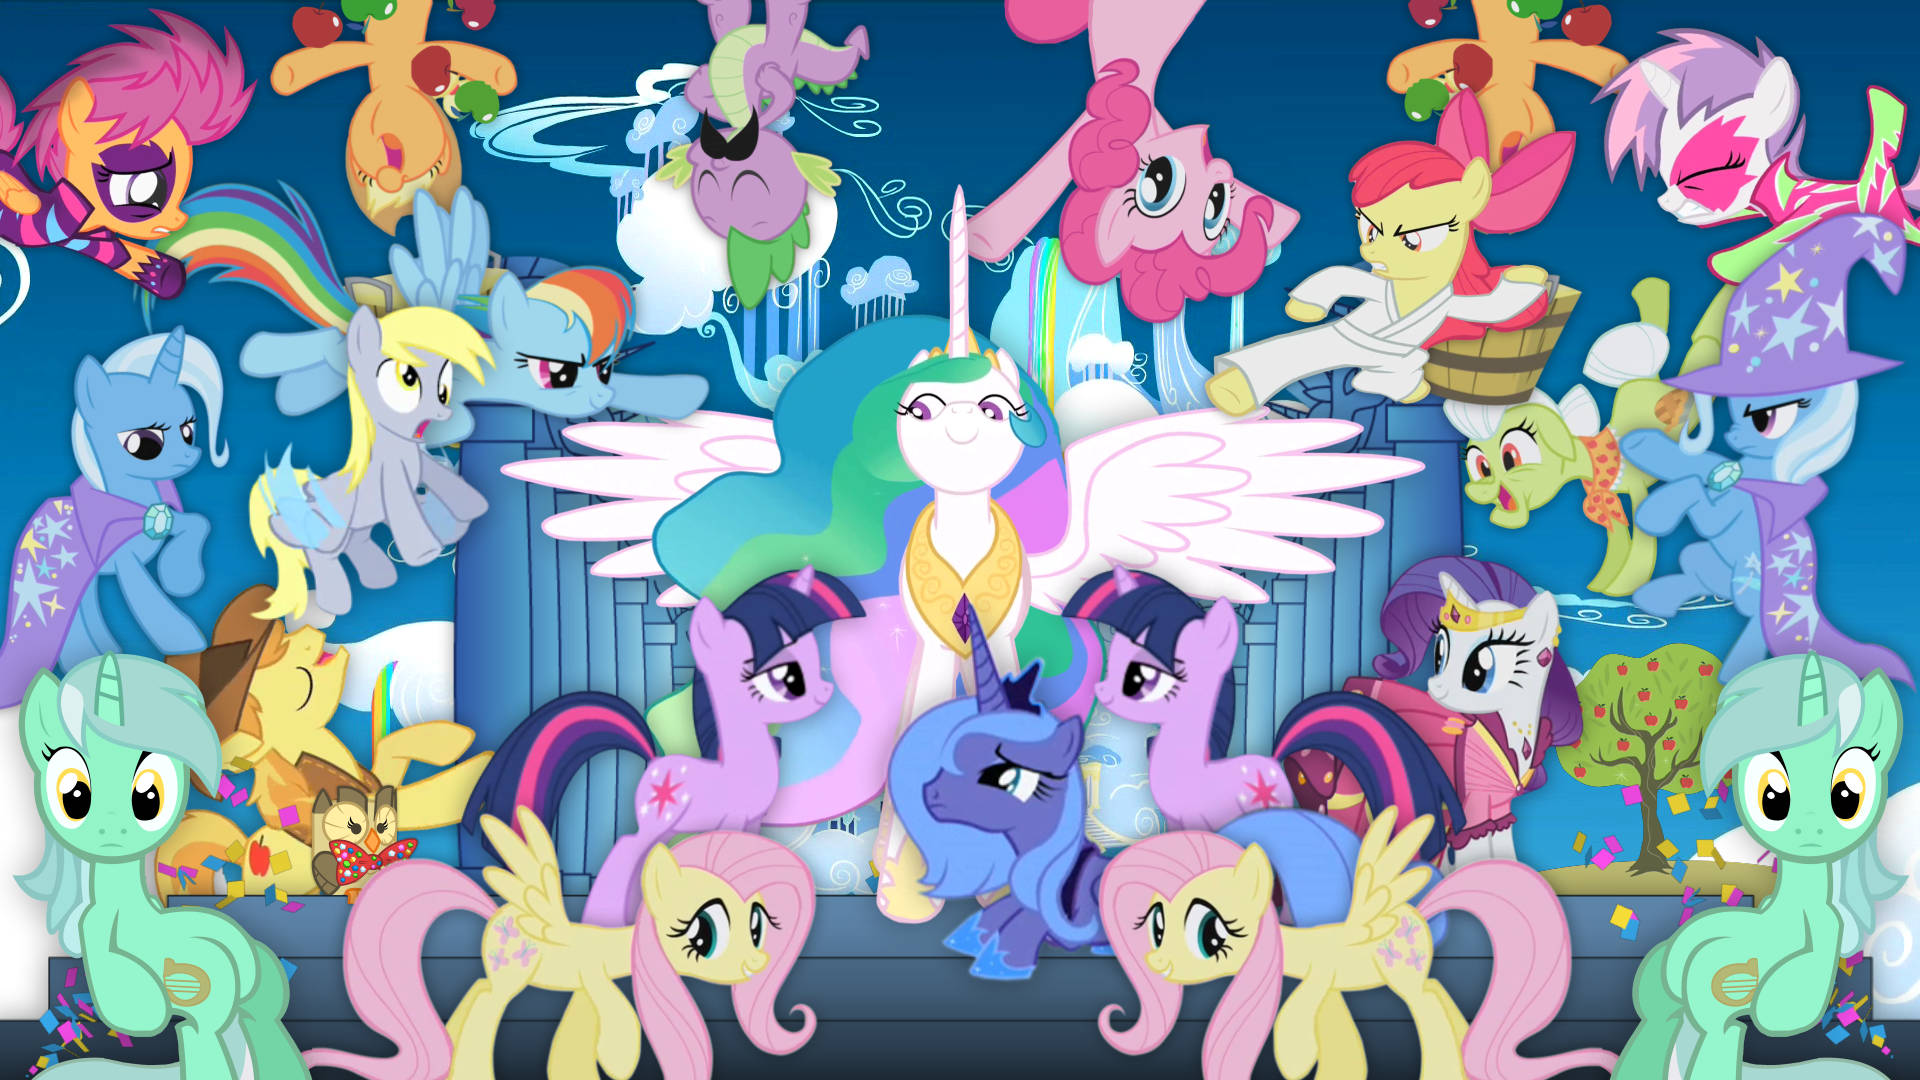 Enjoy An Amazingly Colorful Desktop With My Little Pony